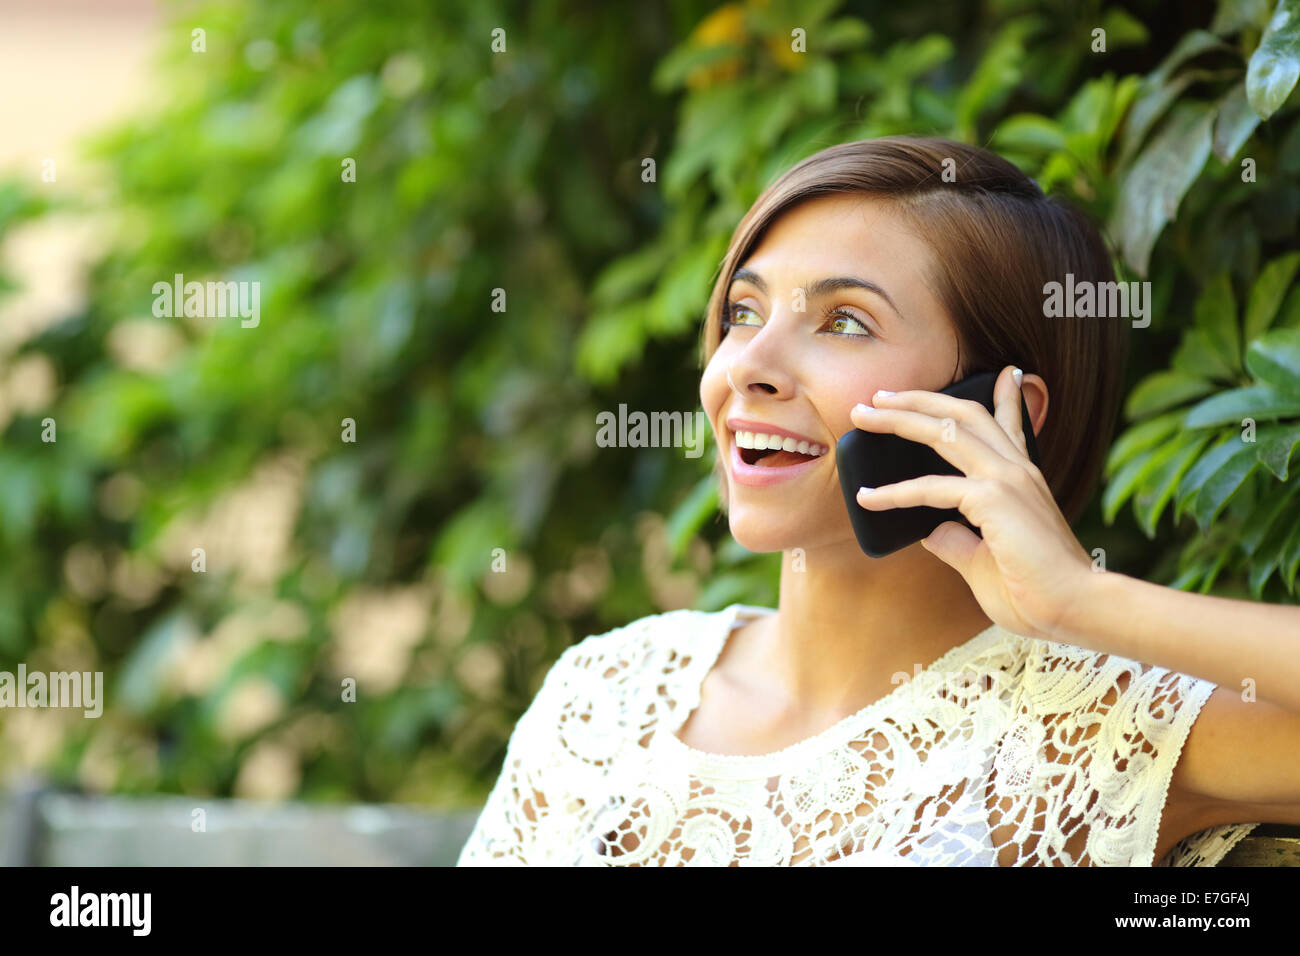 Casual happy woman on the phone in a park sitting on a bench with a green blurred background Stock Photo